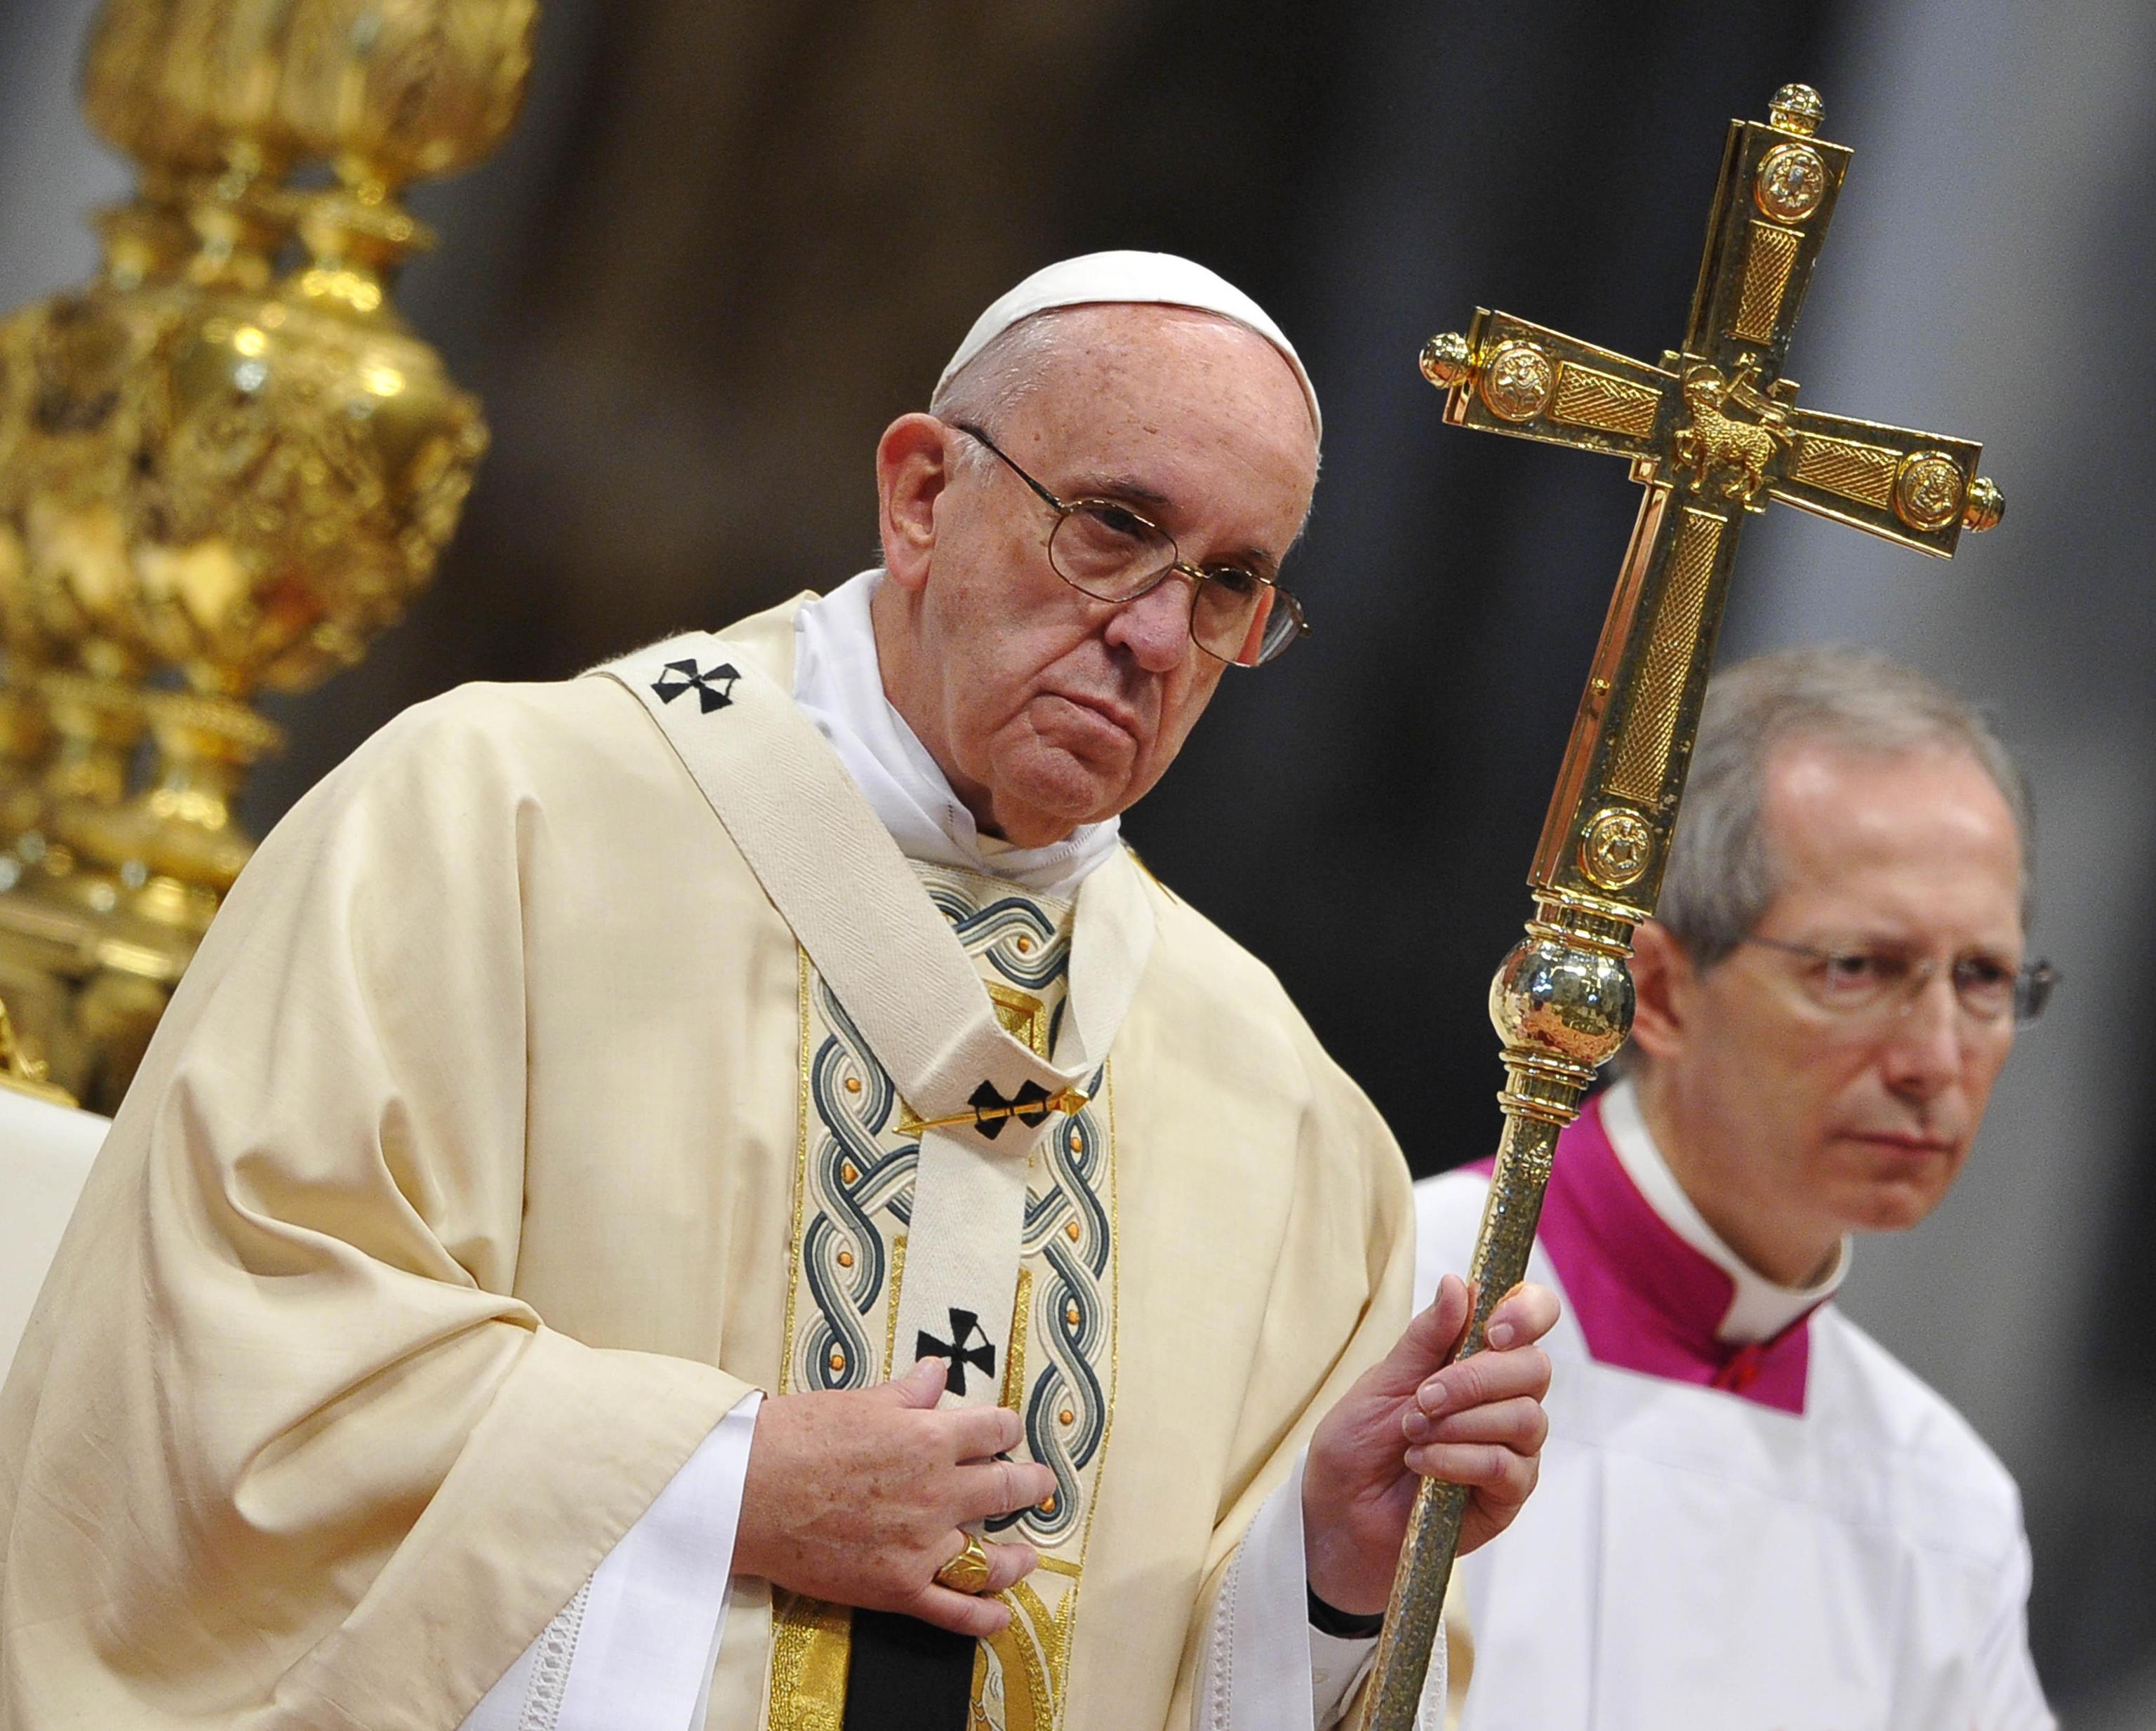 Pope Francis leads the Epiphany mass in Saint Peters Basilica